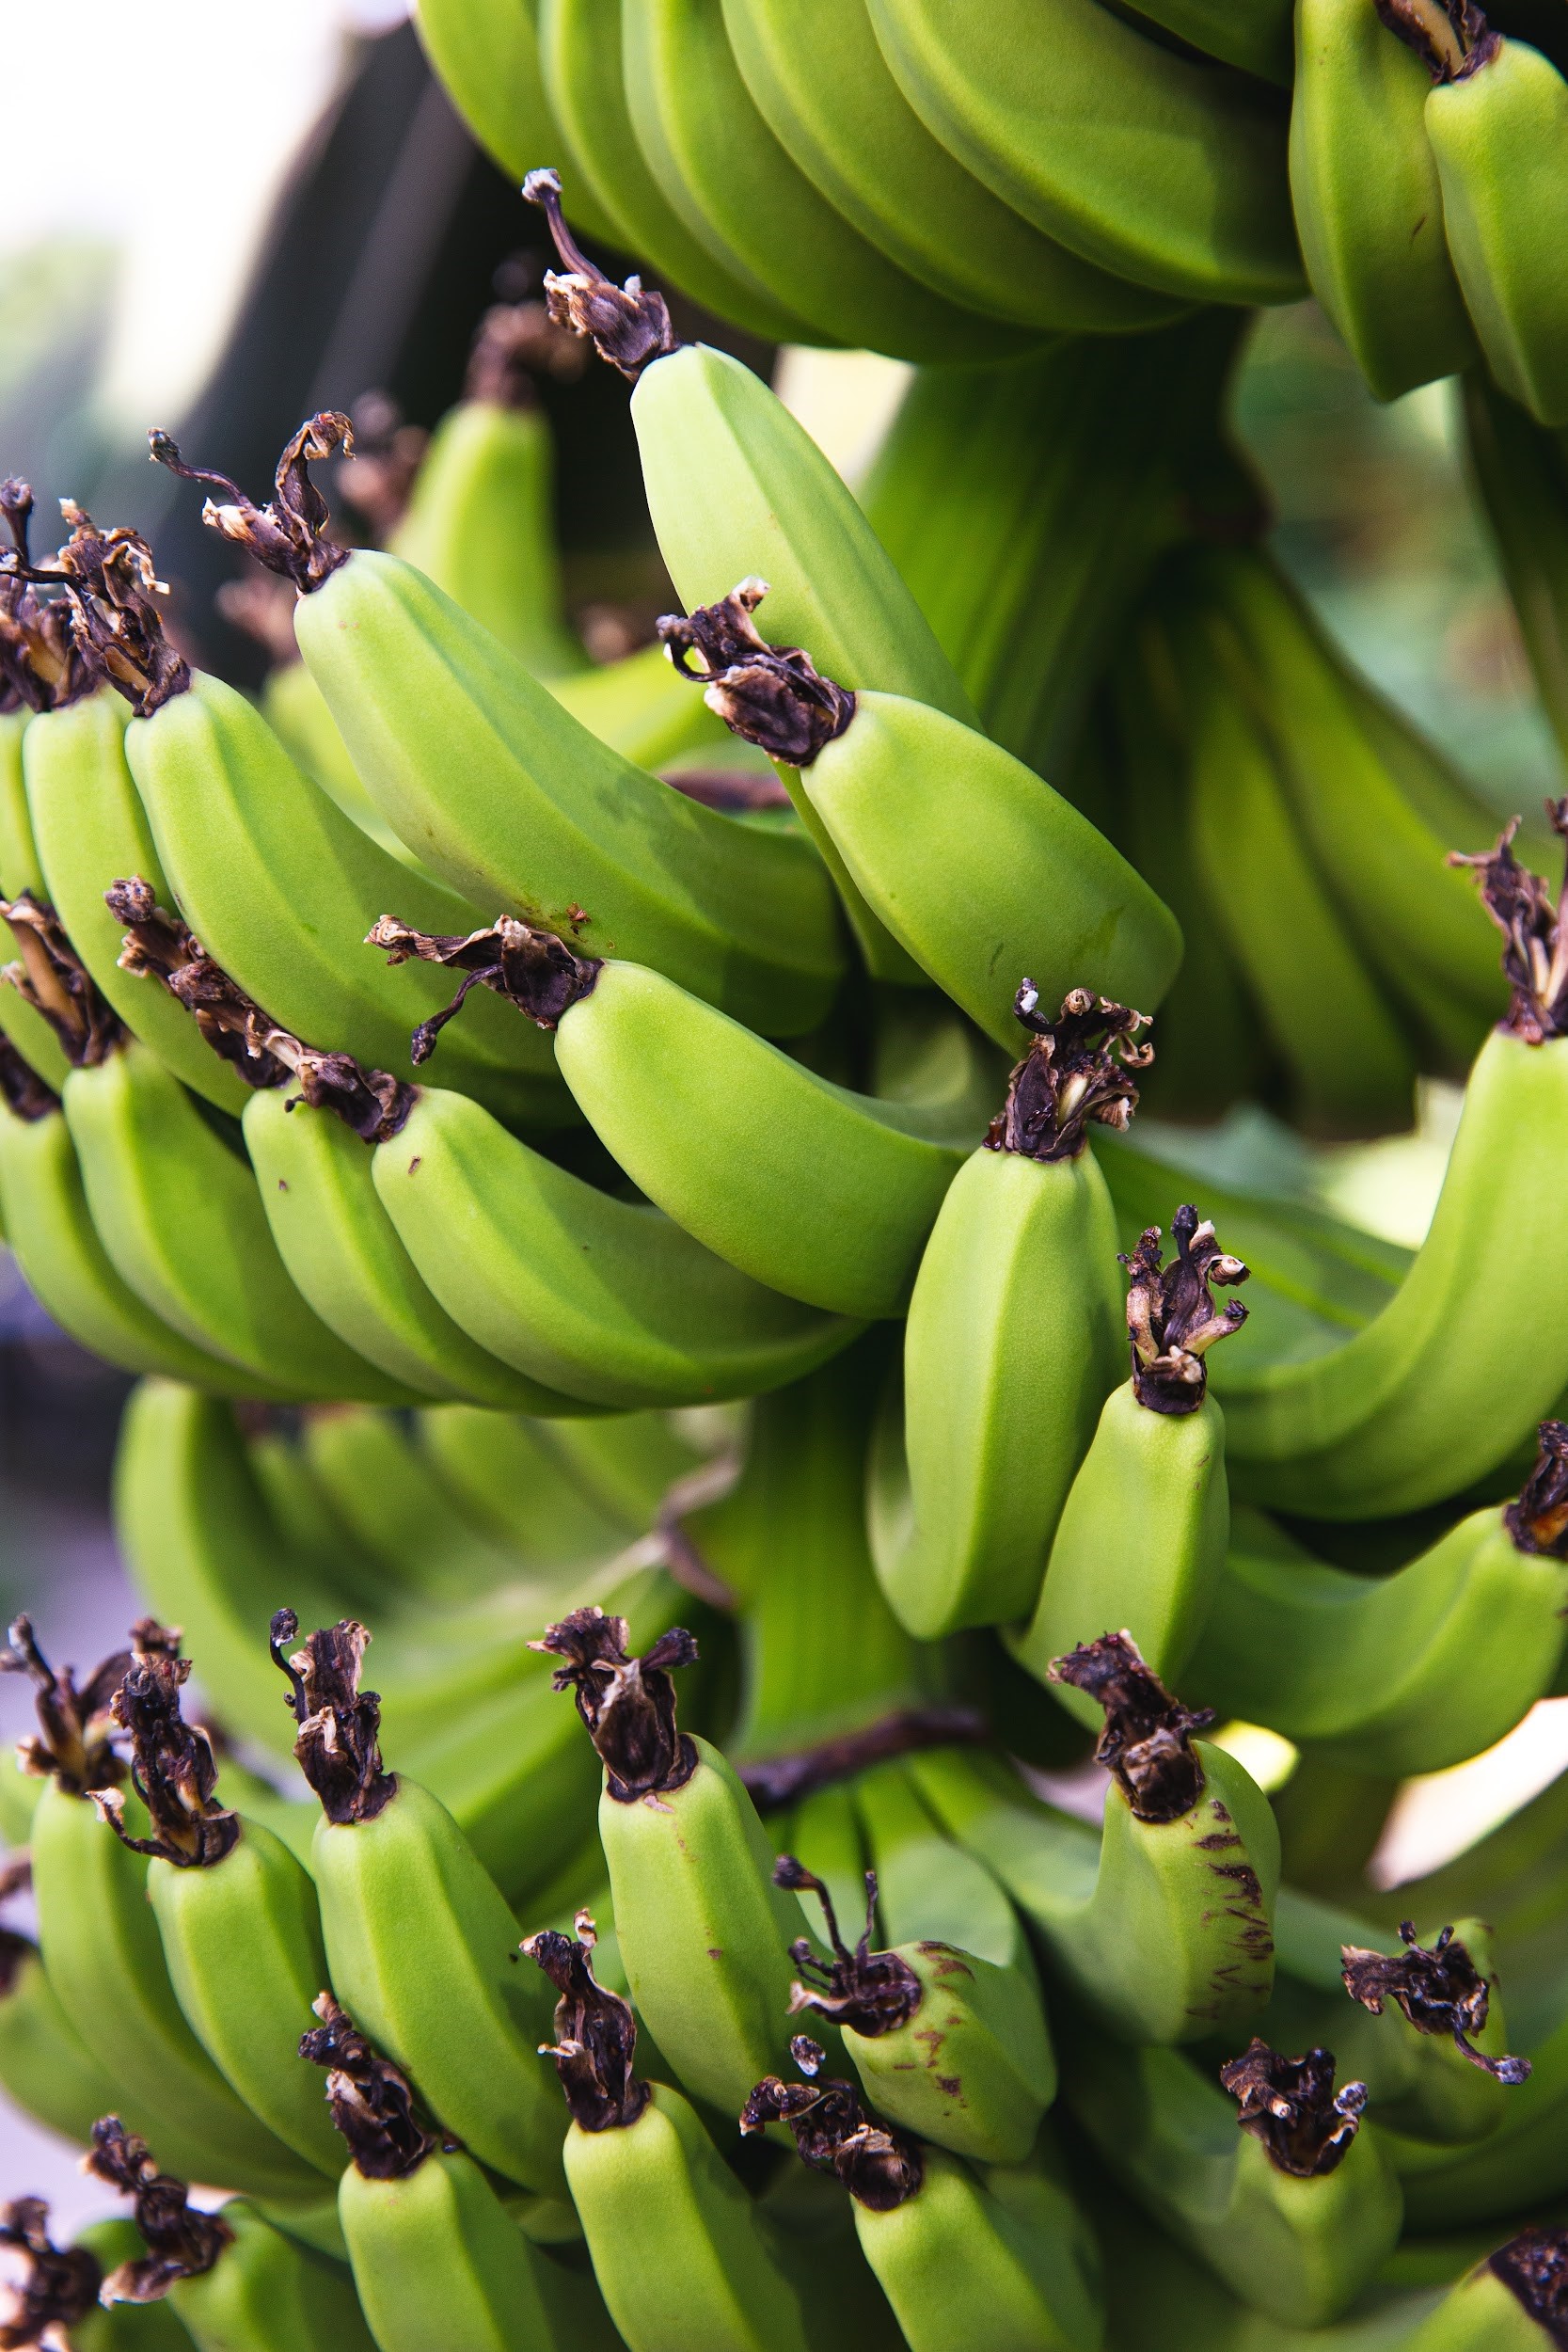 Organic Bananas Ripe For Growth - Produce Business